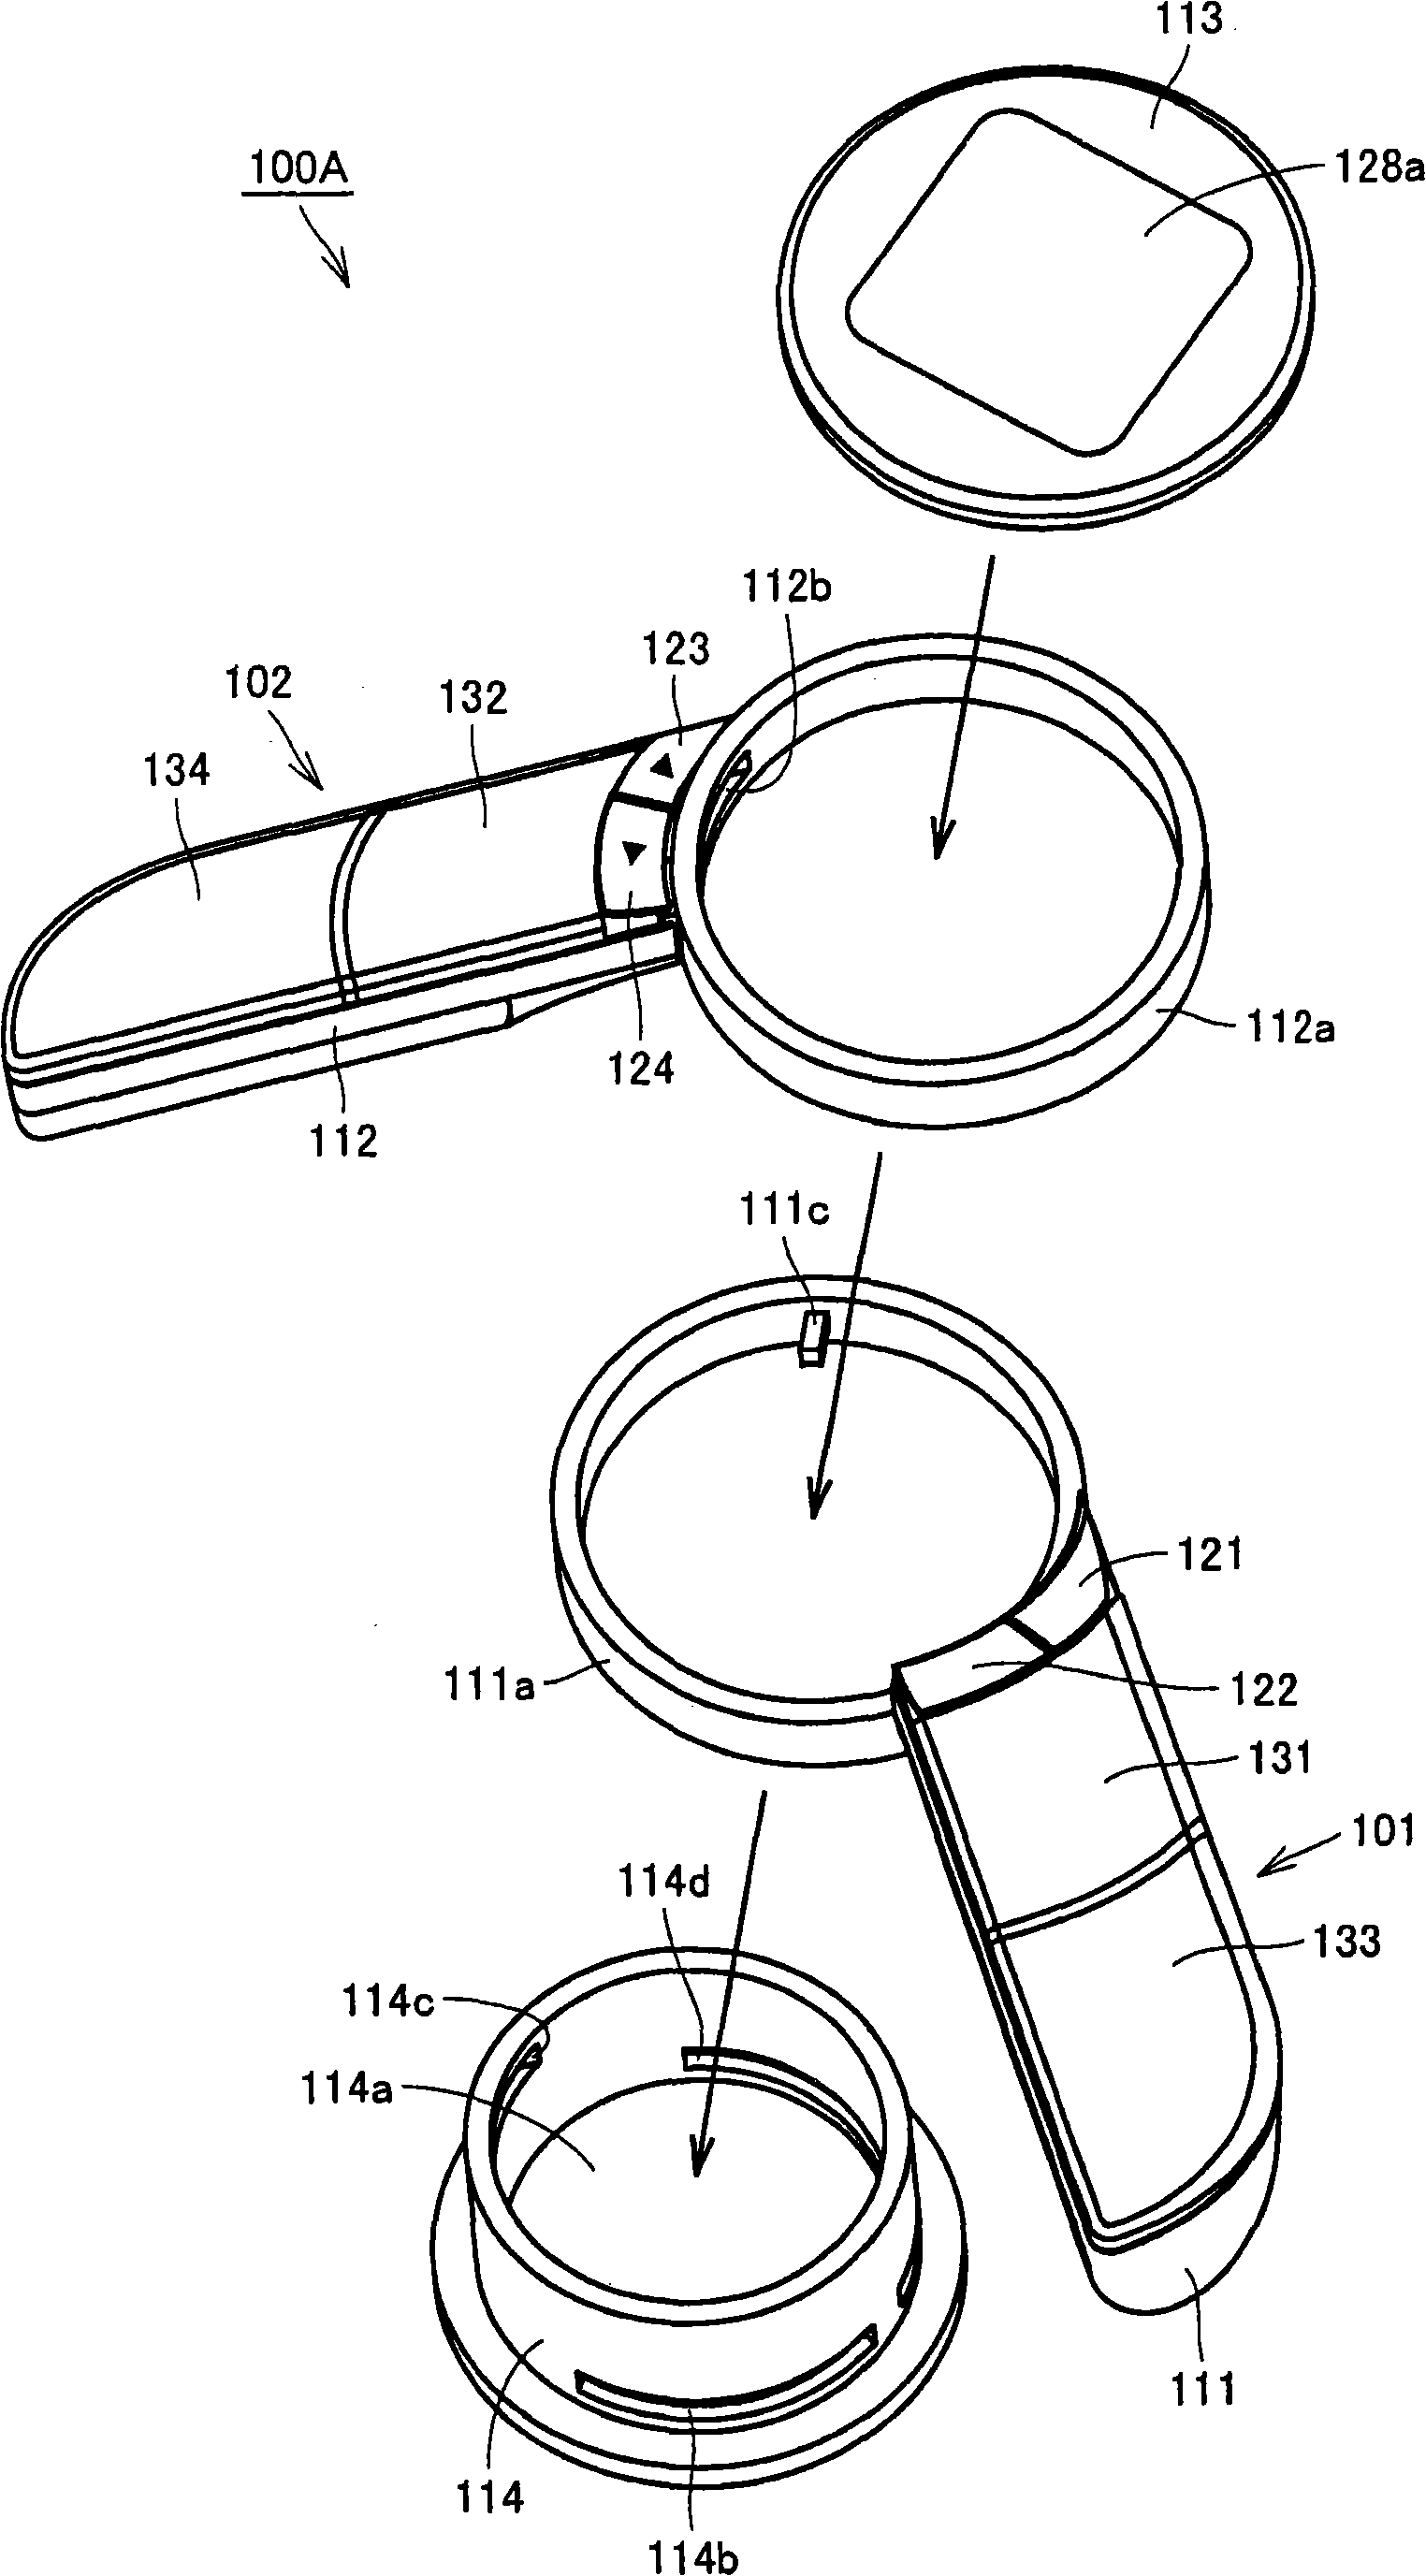 Body composition measuring device